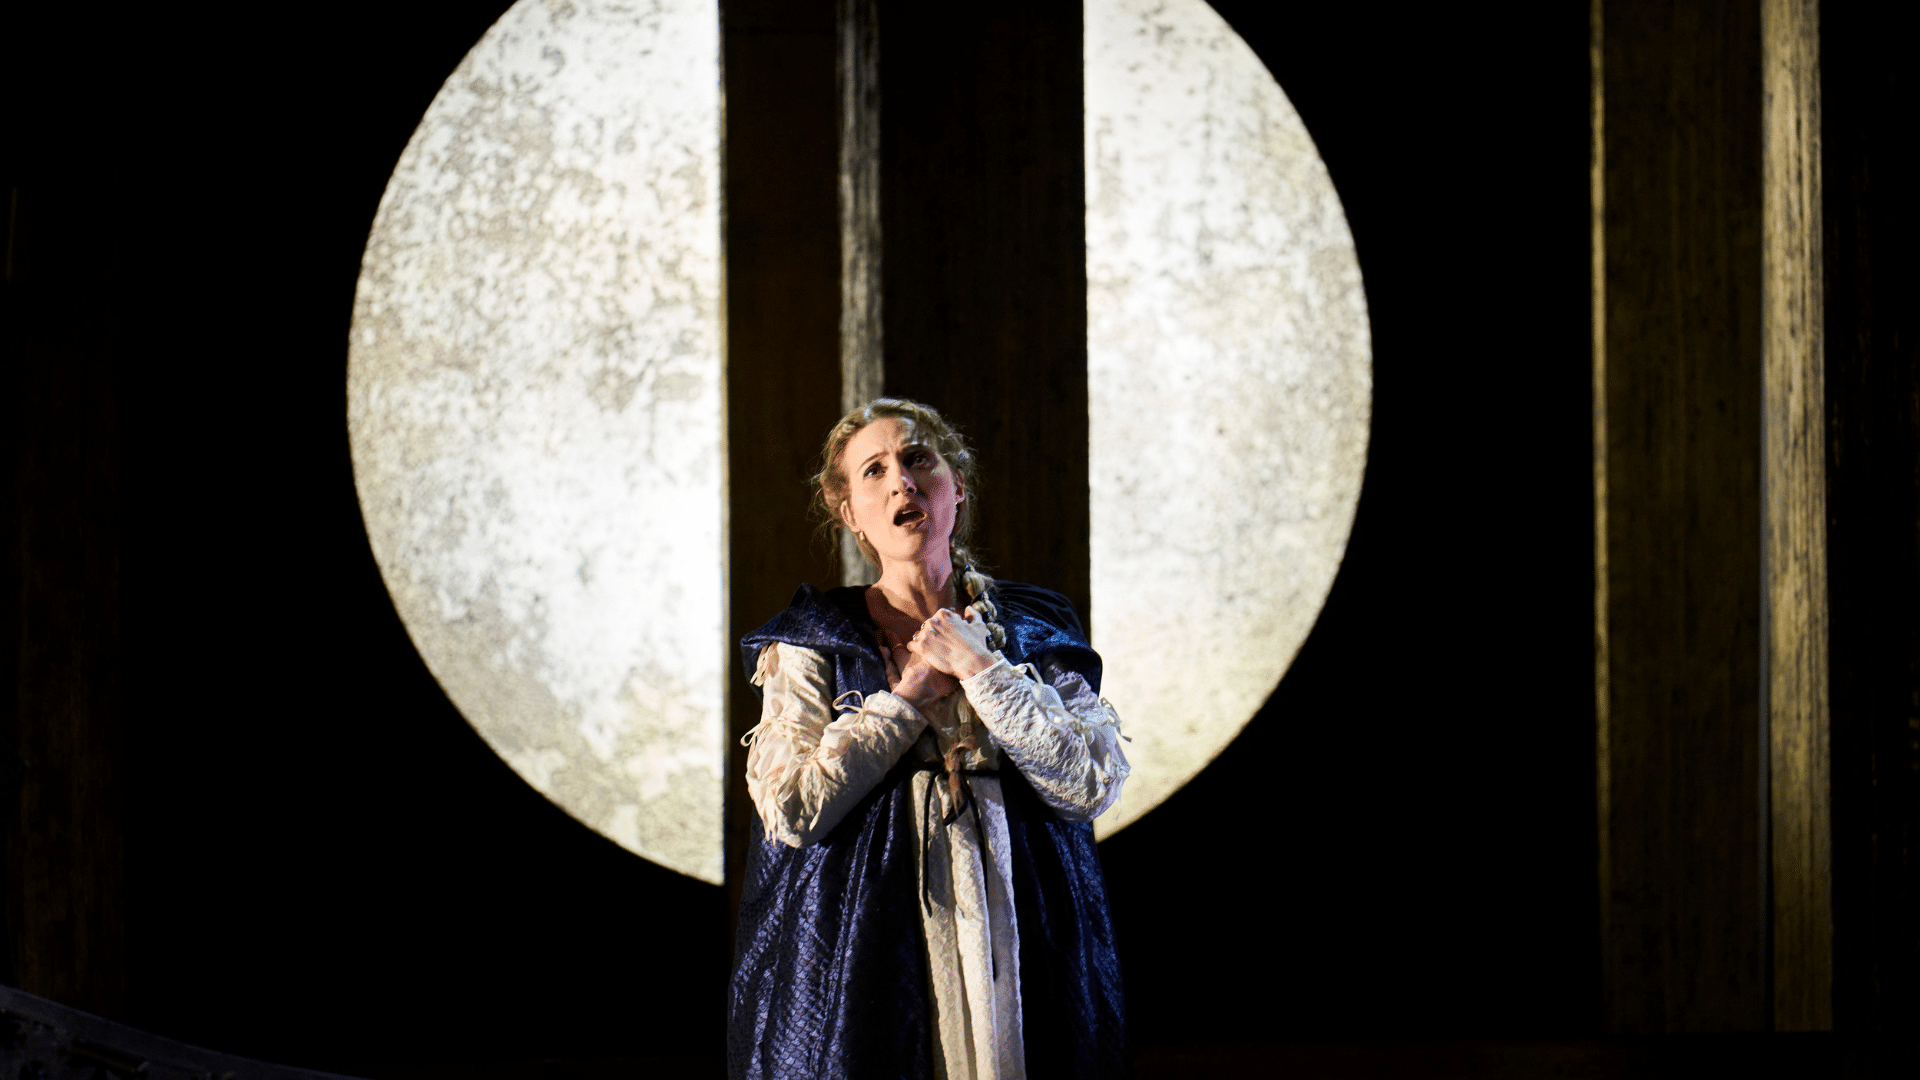 ETO: Lucrezia Borgia production shot - A woman wearing a blue robe with a white long-sleeved under shirt, faces forwards and holds her hands together across her chest while singing. Behind her is a white glowing moon-like orb, split in two to form an opening.